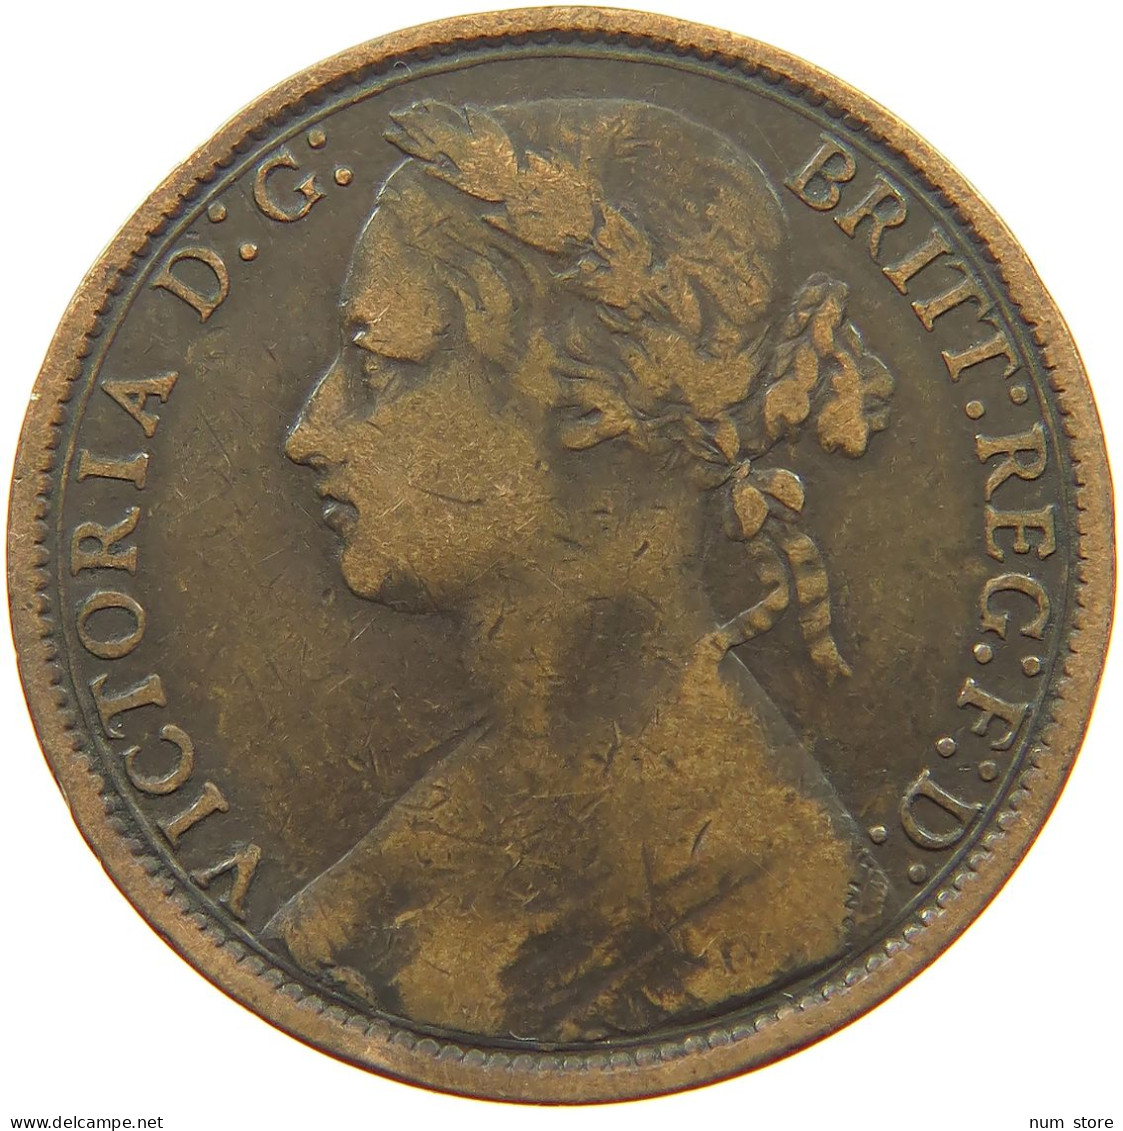 GREAT BRITAIN PENNY 1877 Victoria 1837-1901 #s076 0587 - D. 1 Penny